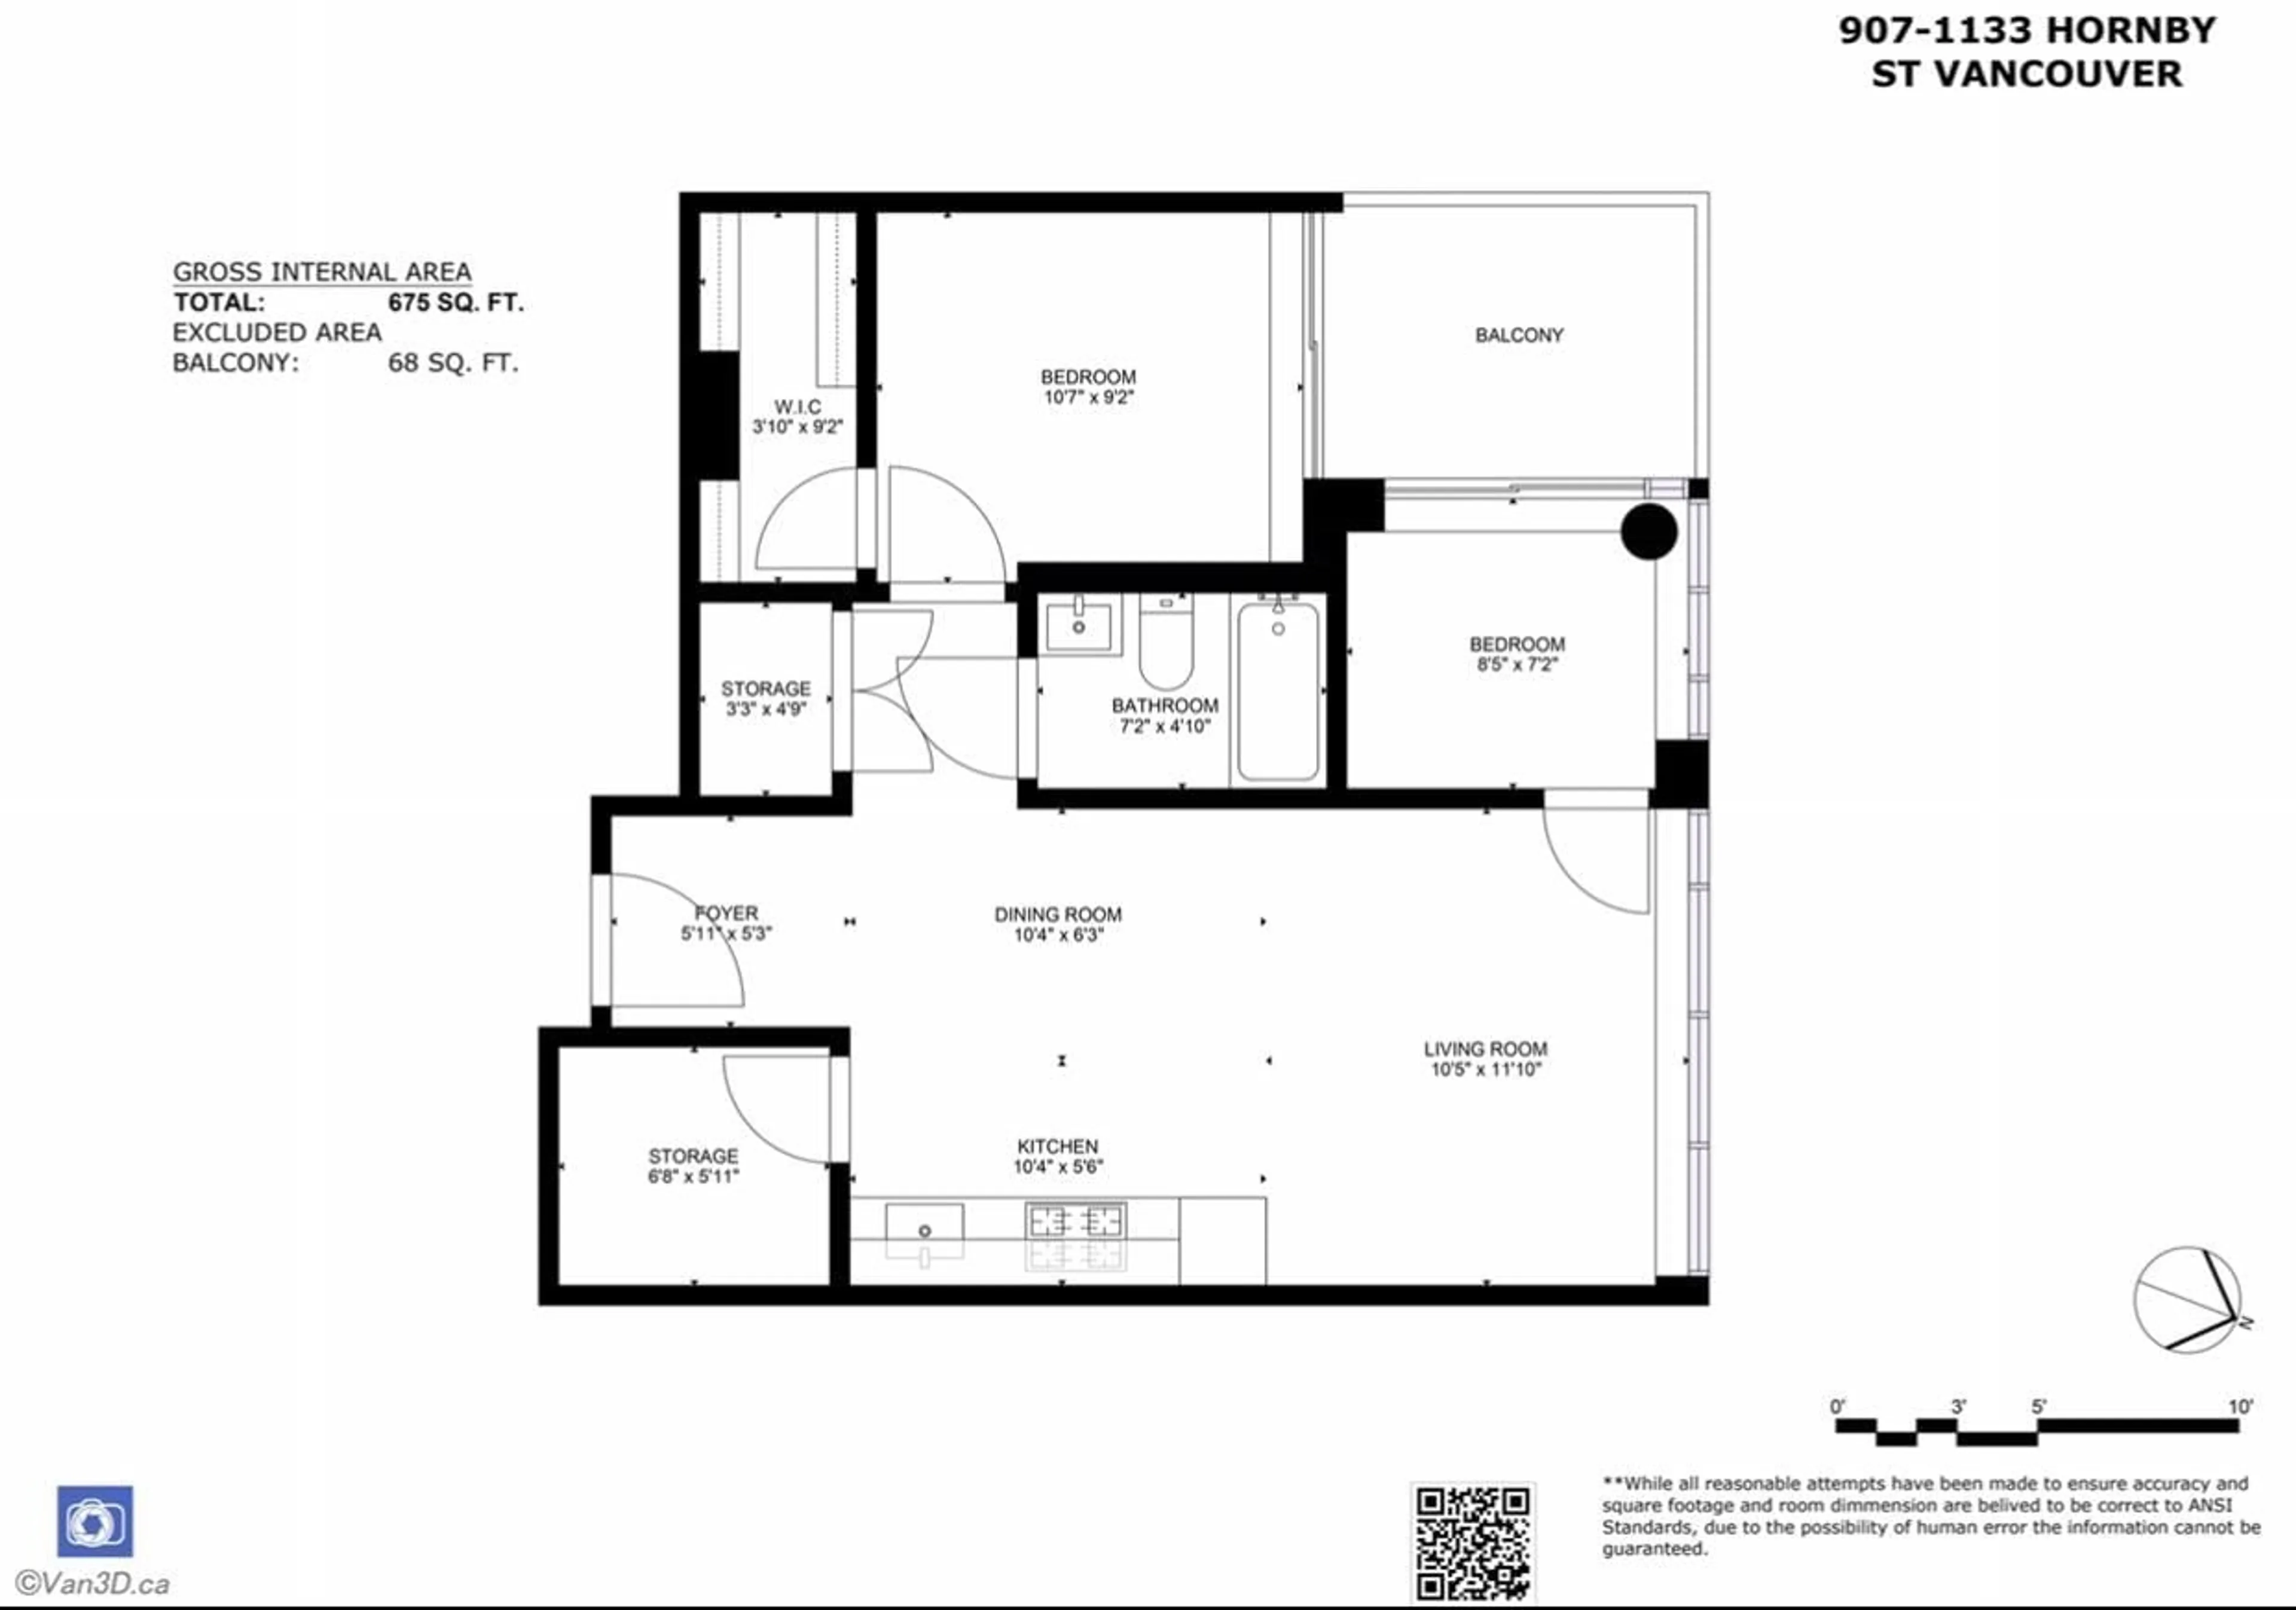 Floor plan for 907 1133 HORNBY STREET, Vancouver British Columbia V6Z1W1